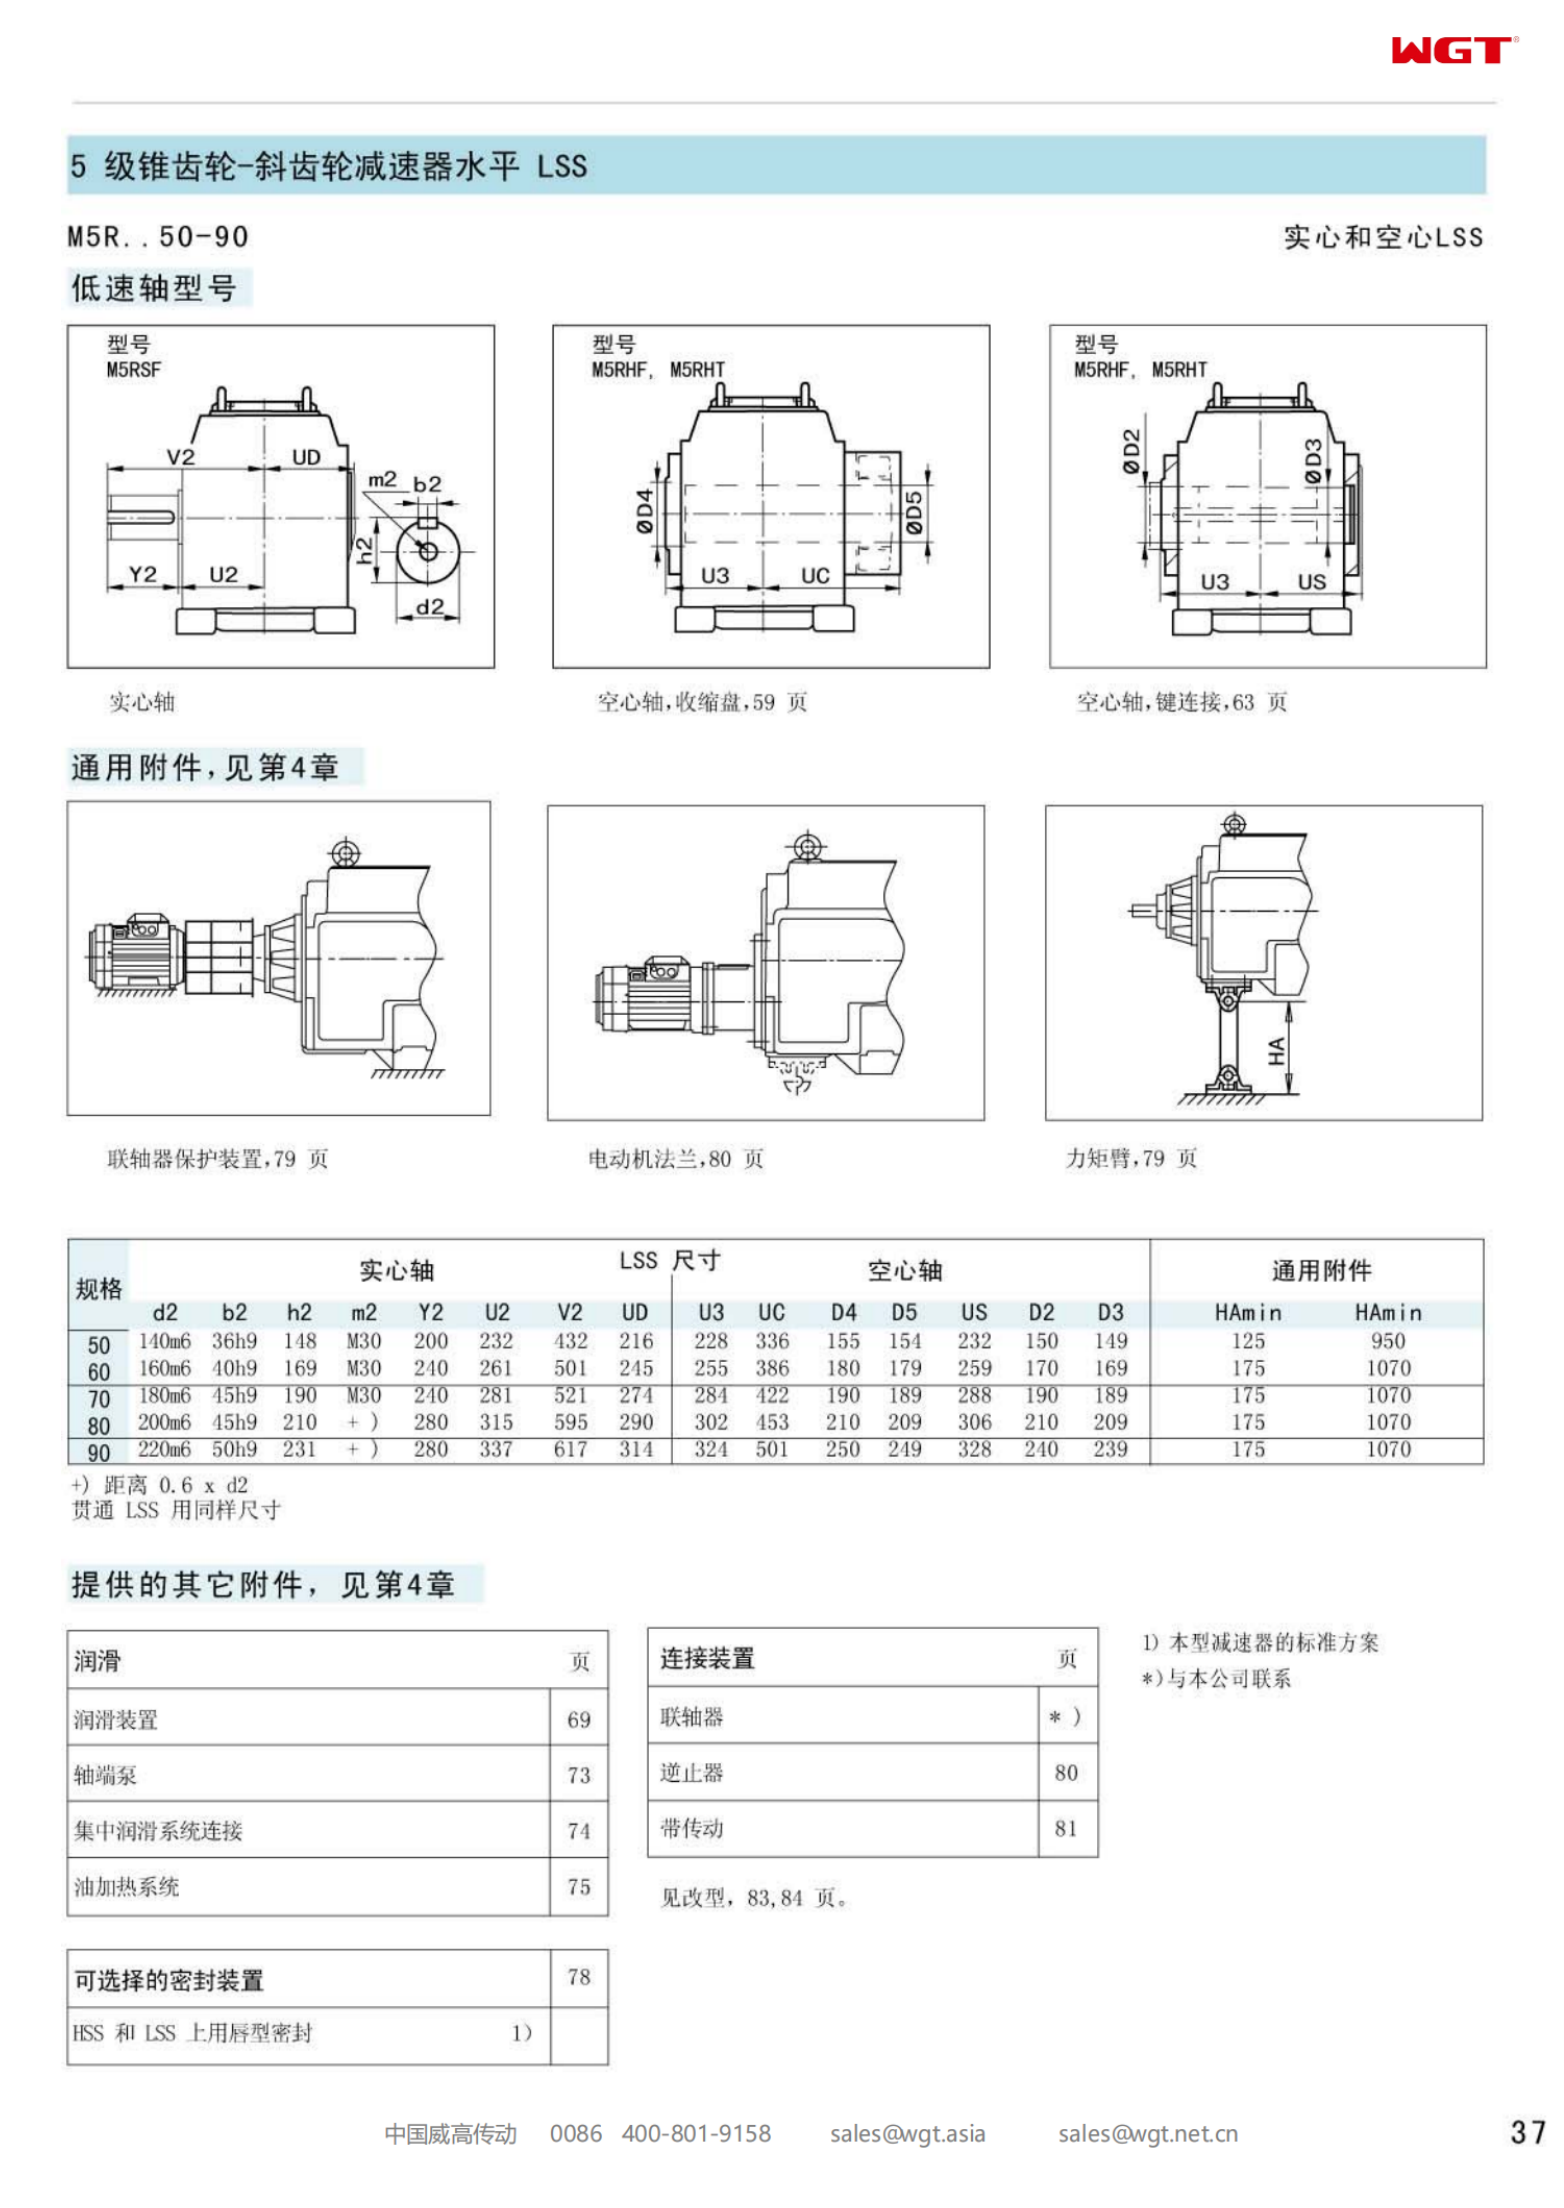 M2PVSF50 Replace_SEW_M_Series Gearbox